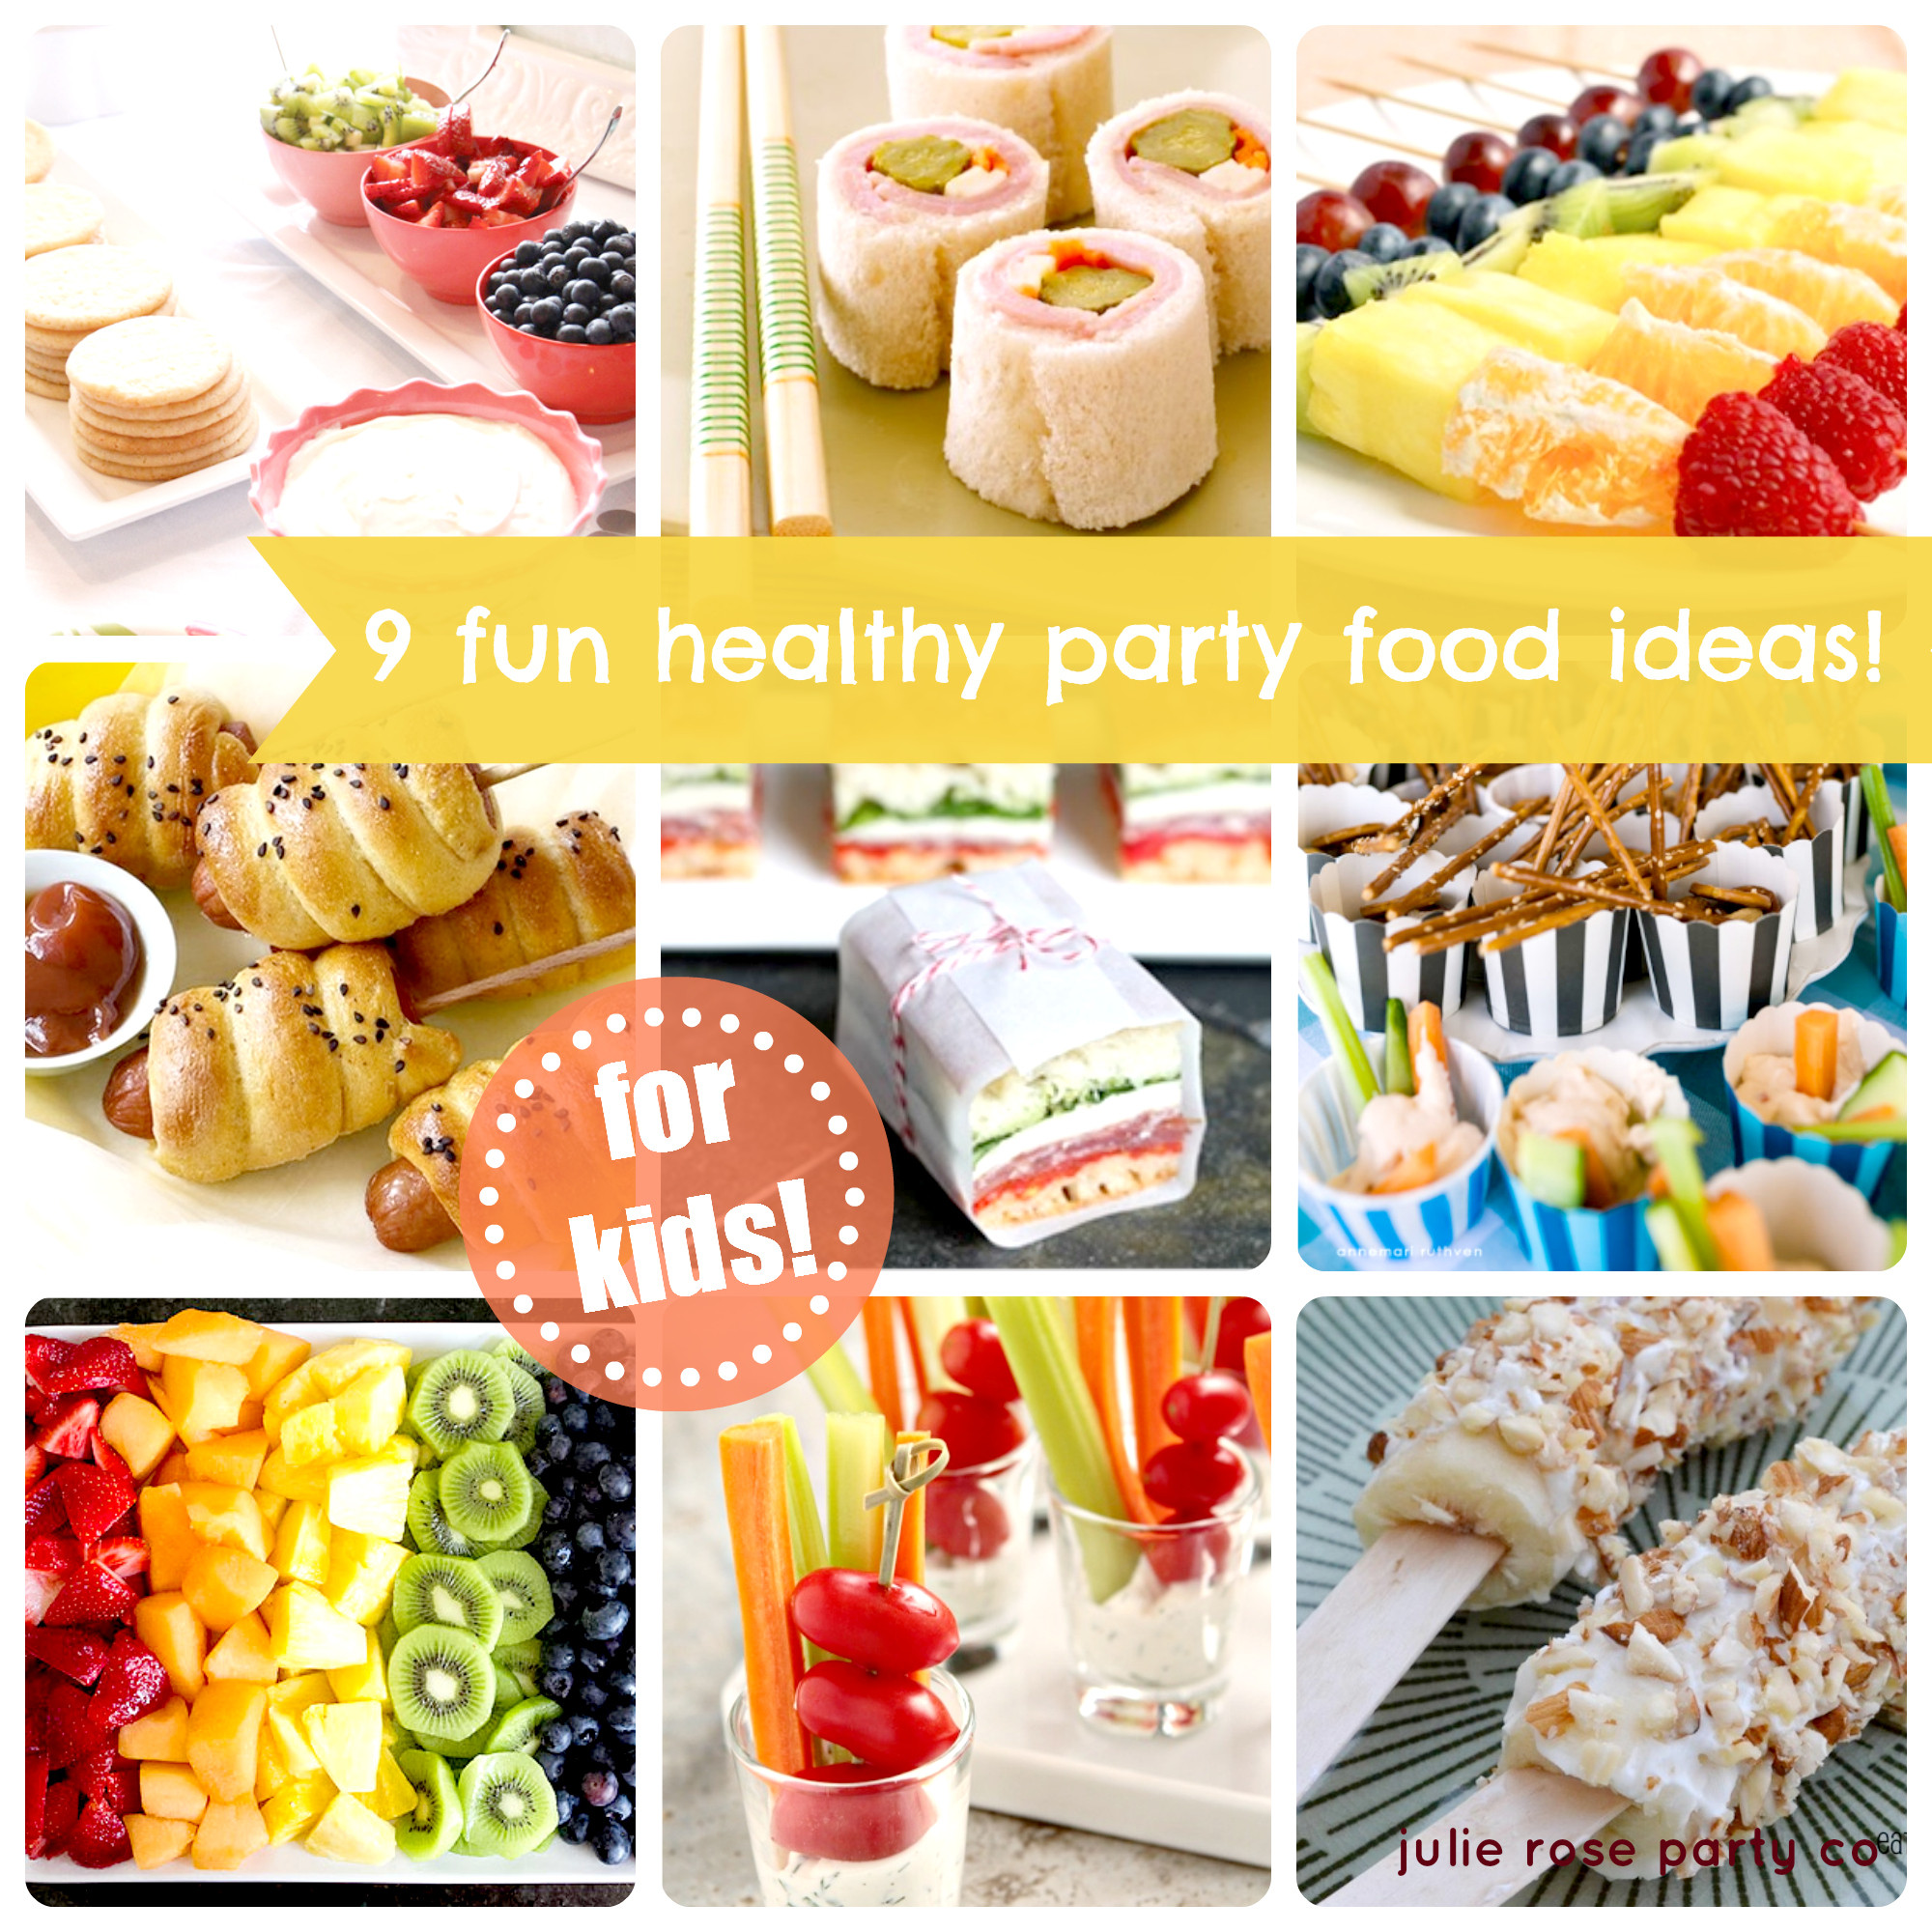 Food Ideas For Kids Birthday Party
 9 fun and healthy party food ideas kids